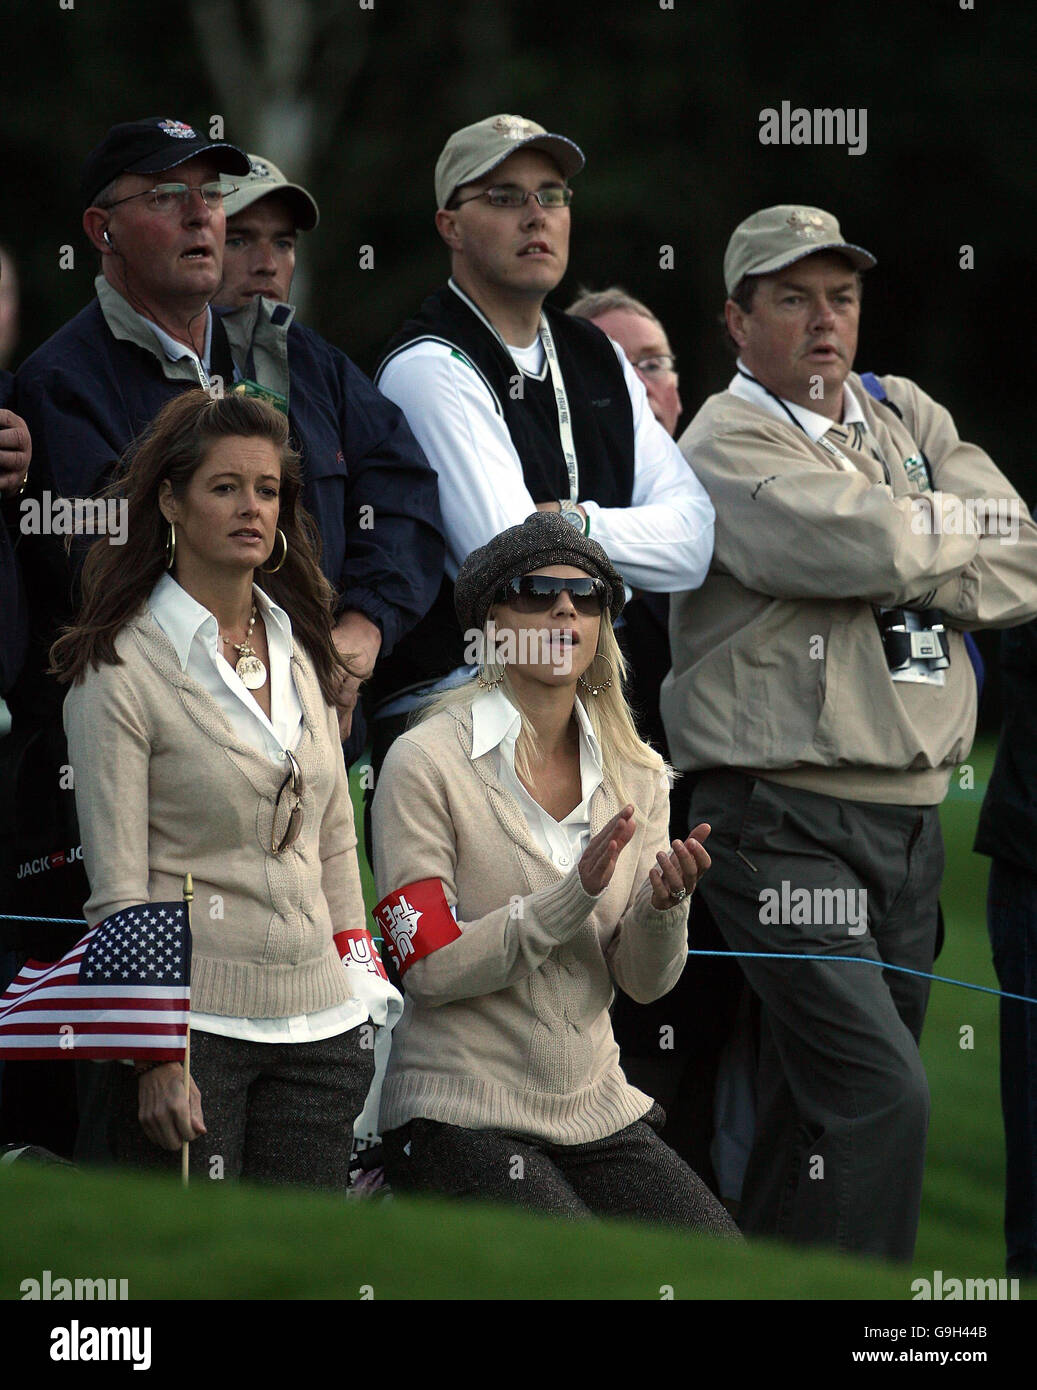 Tiger Woods wife Elin (right) watches her husband putt on the first green, during this mornings Four Ball round at the Ryder Cup, at the K Club in Co Kildare. Friday September 22nd, 2006. Stock Photo